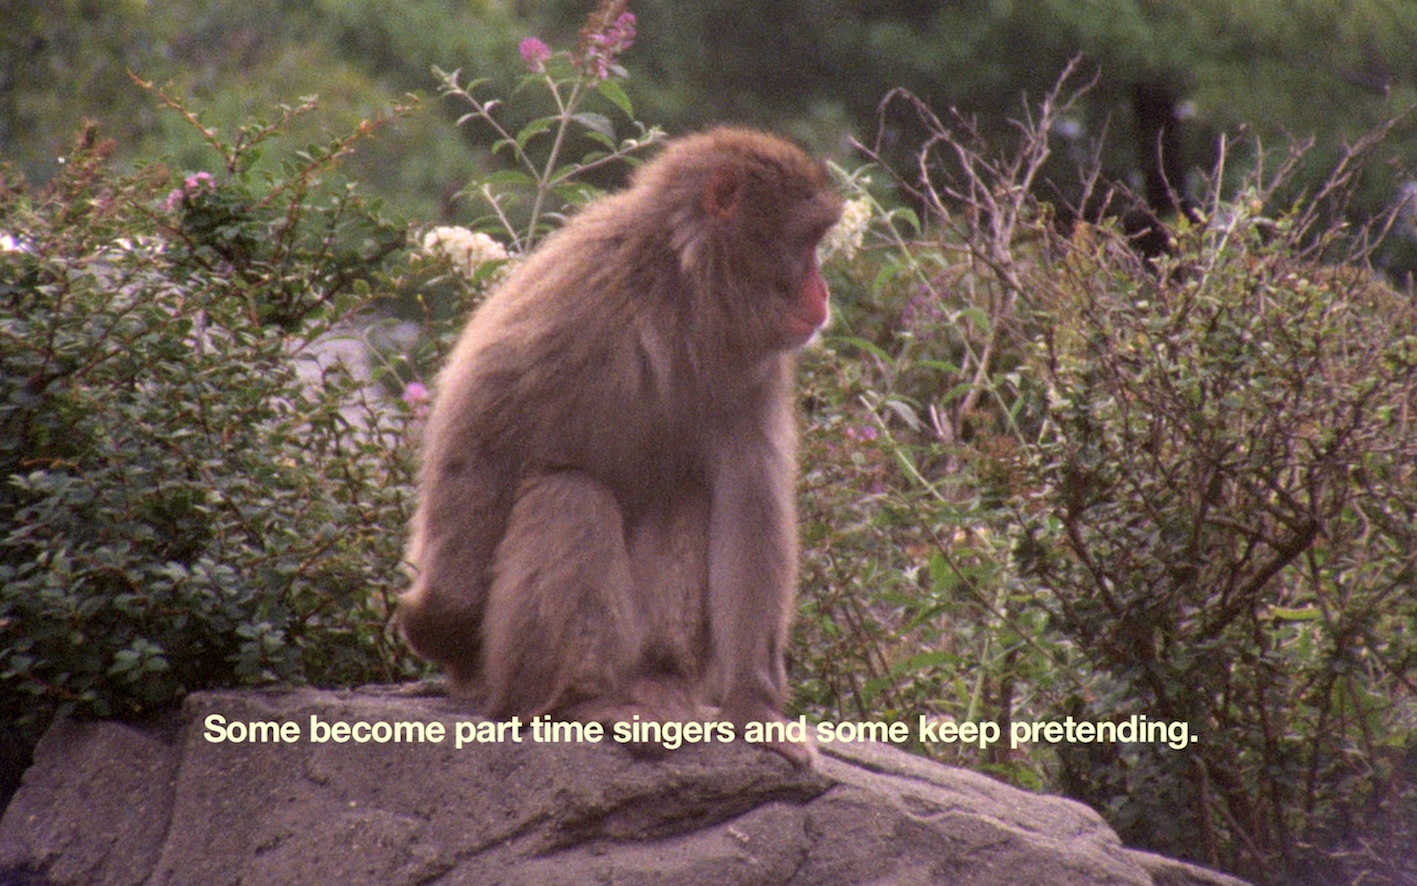  The Everyday Ritual of Solitude&nbsp;Hatching Monkey, 2014, Super 16 mm film transferred to Full HD, 13 min 22 sec 